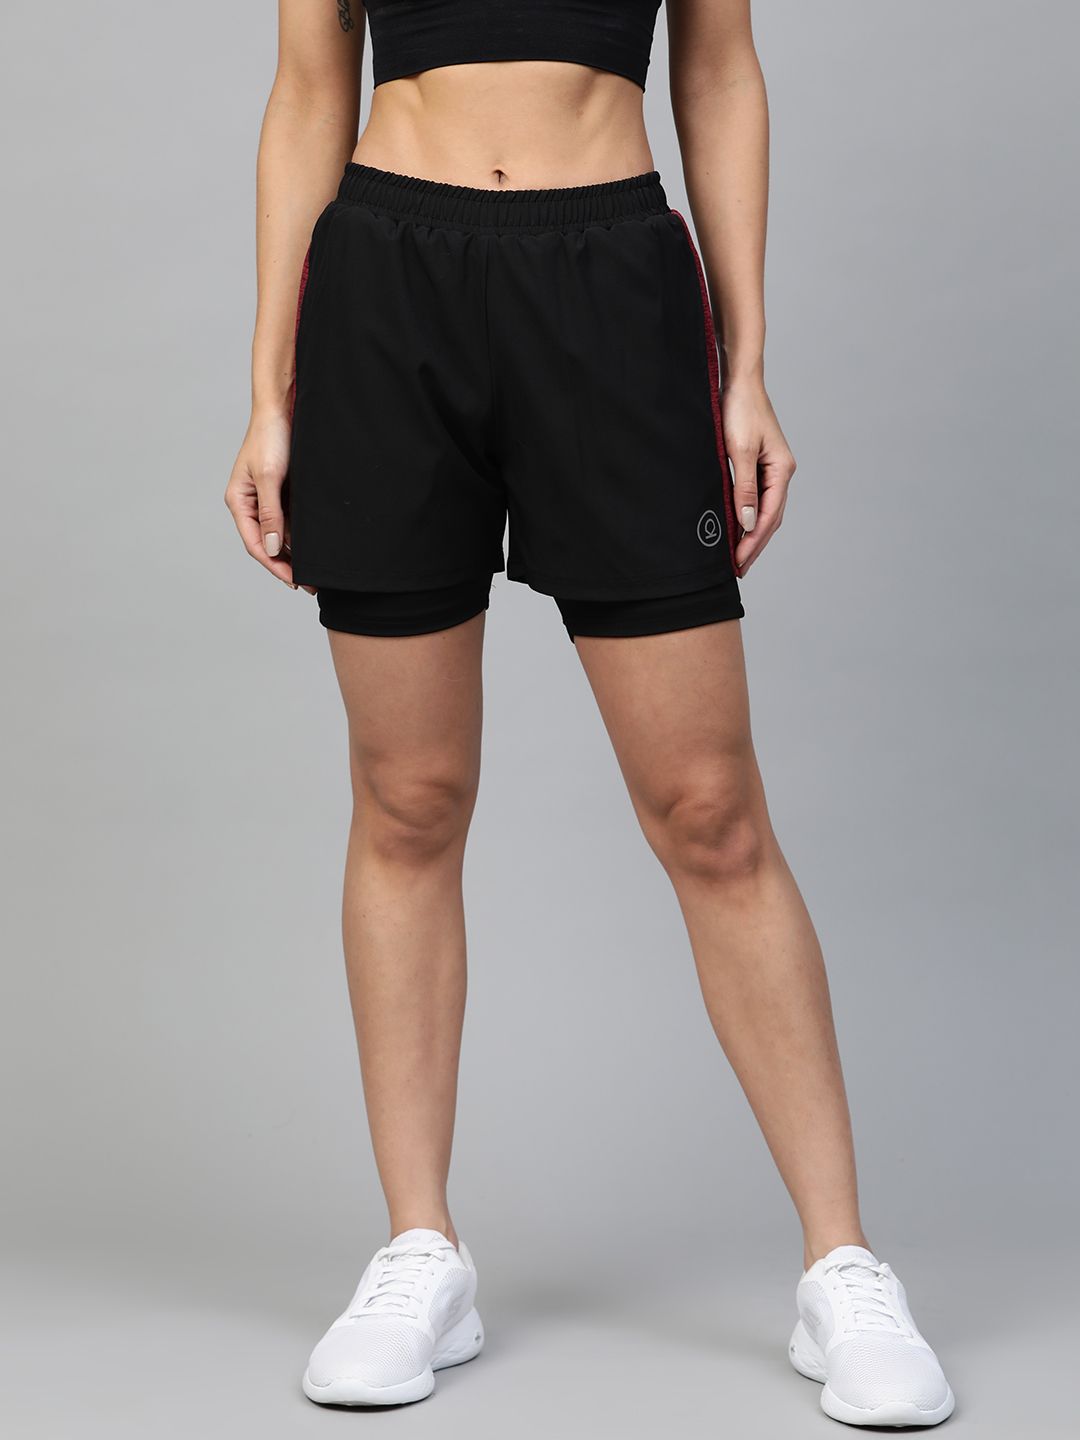 Chkokko Women Black Side Panelled Regular Fit Double Layered Running Shorts Price in India